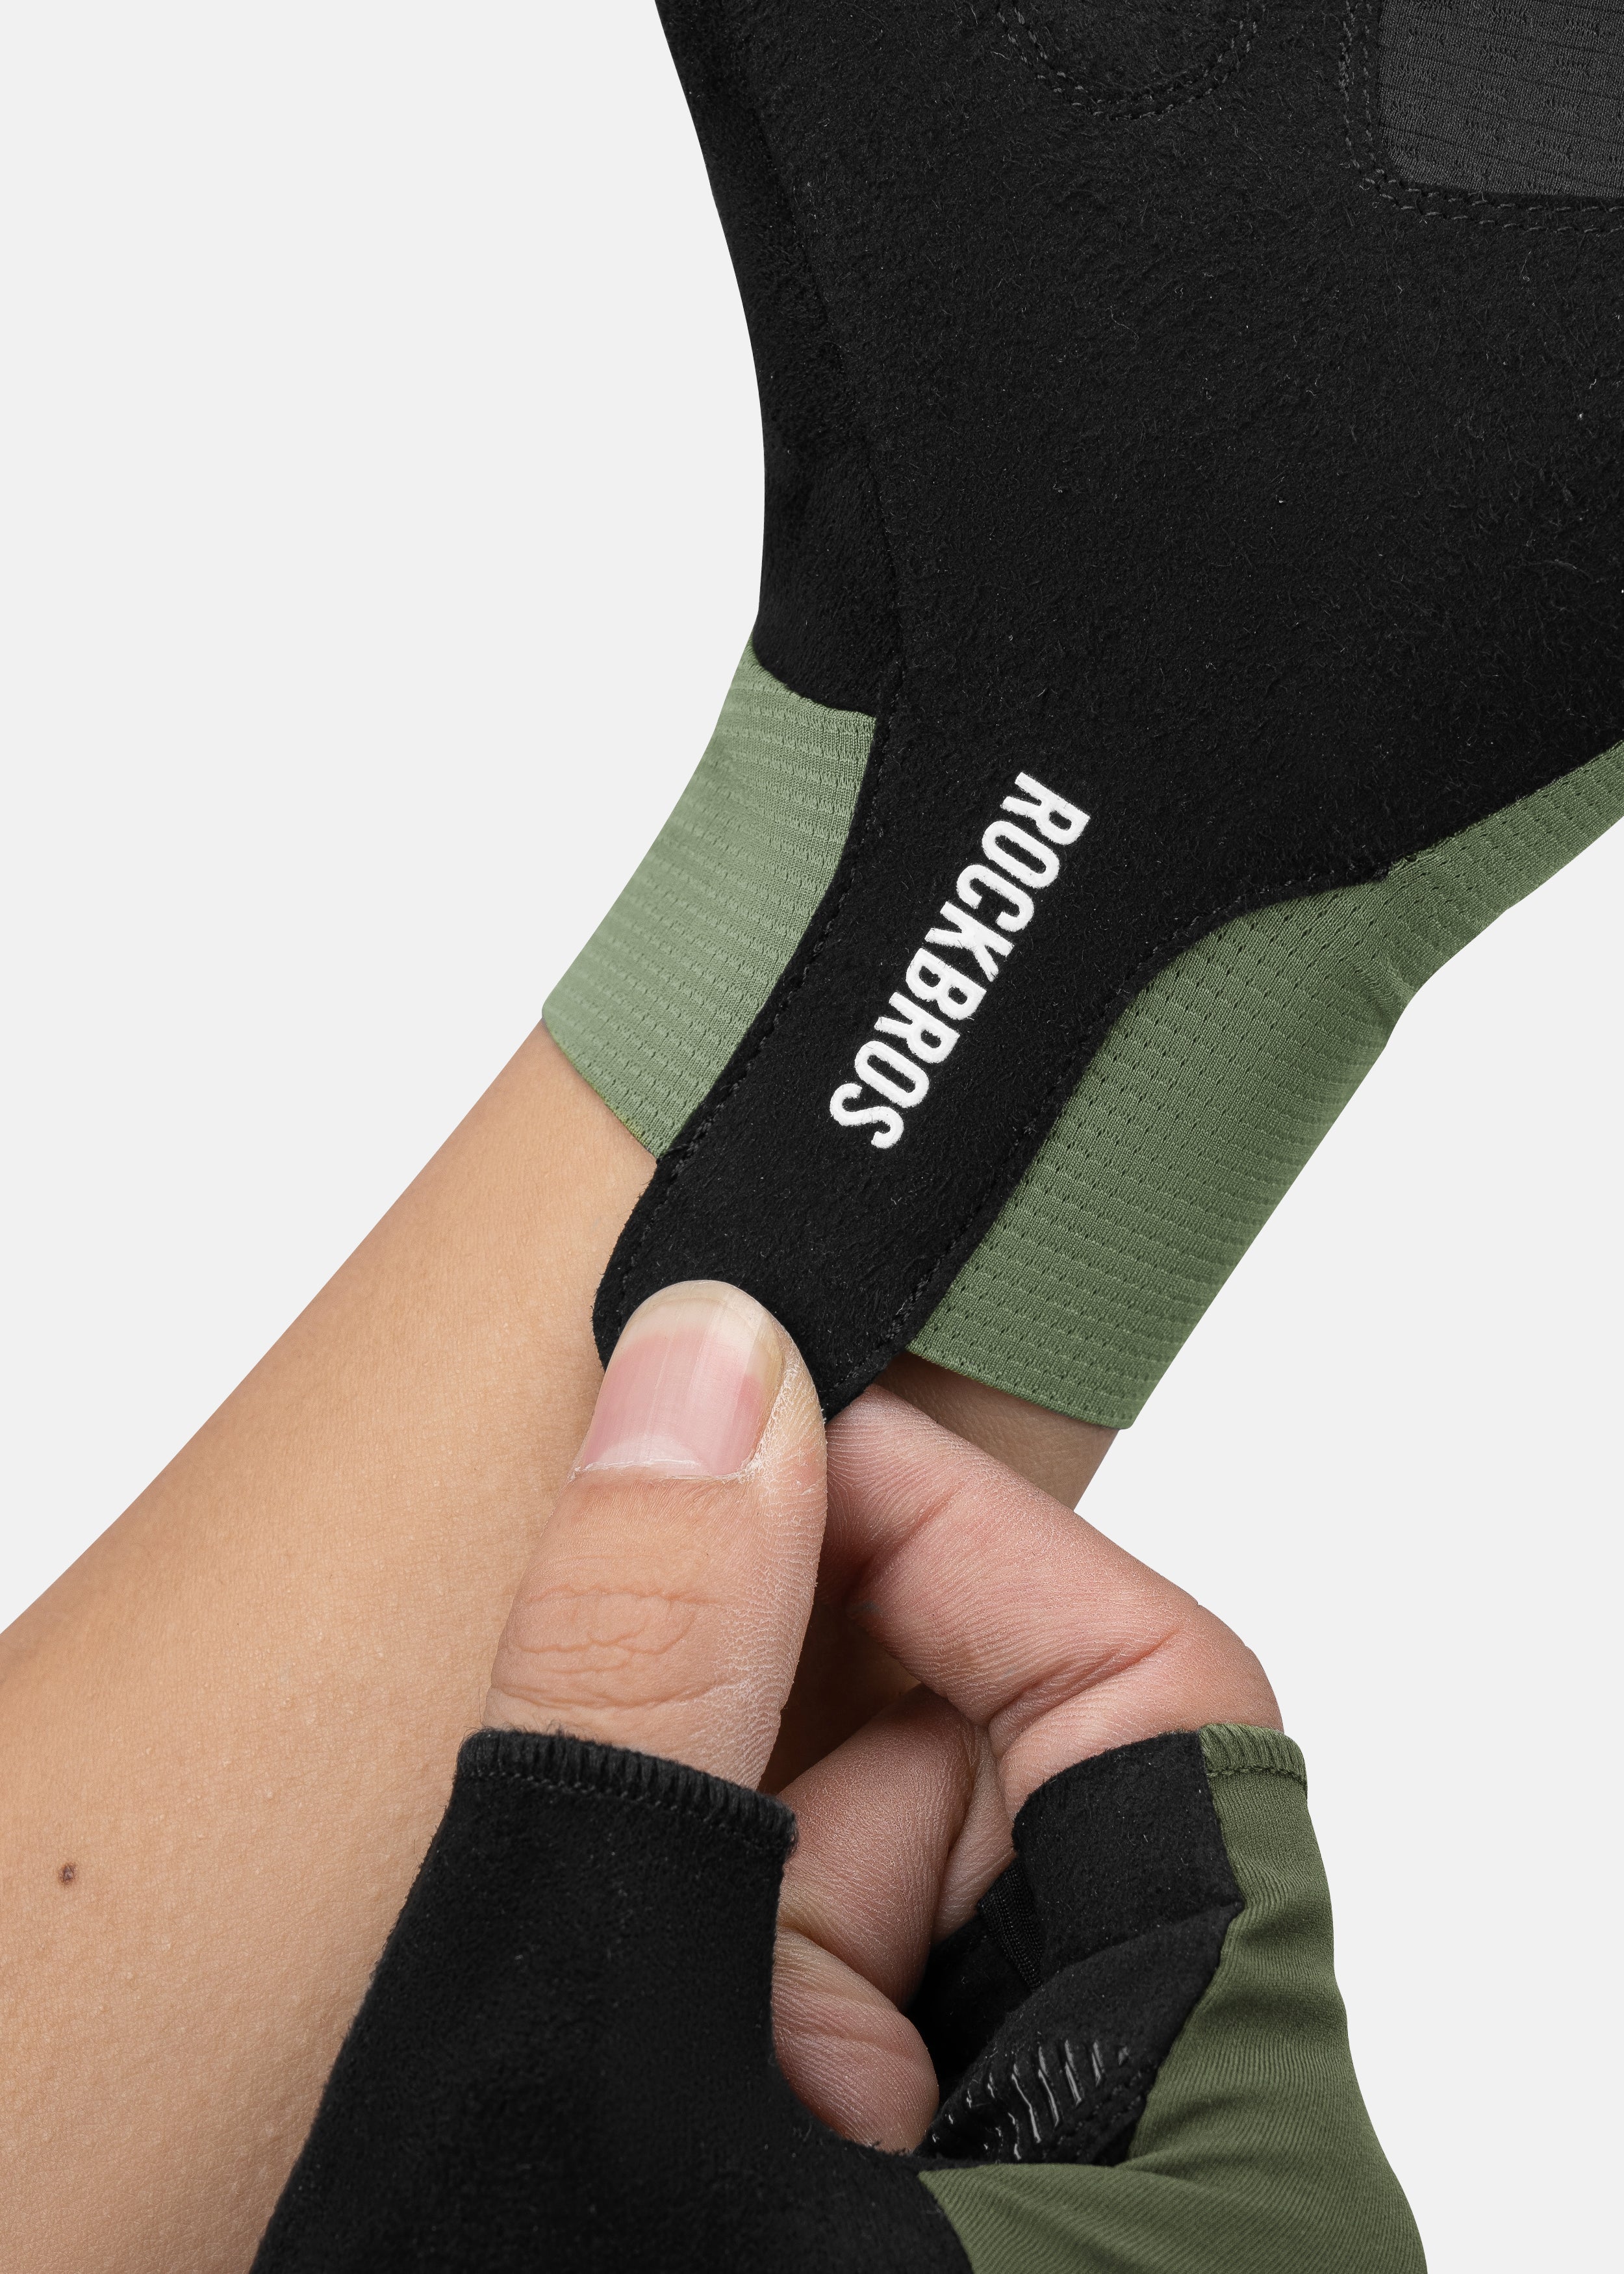 ROCKRBOS Road-to-Sky Cycling Fingerless Gloves